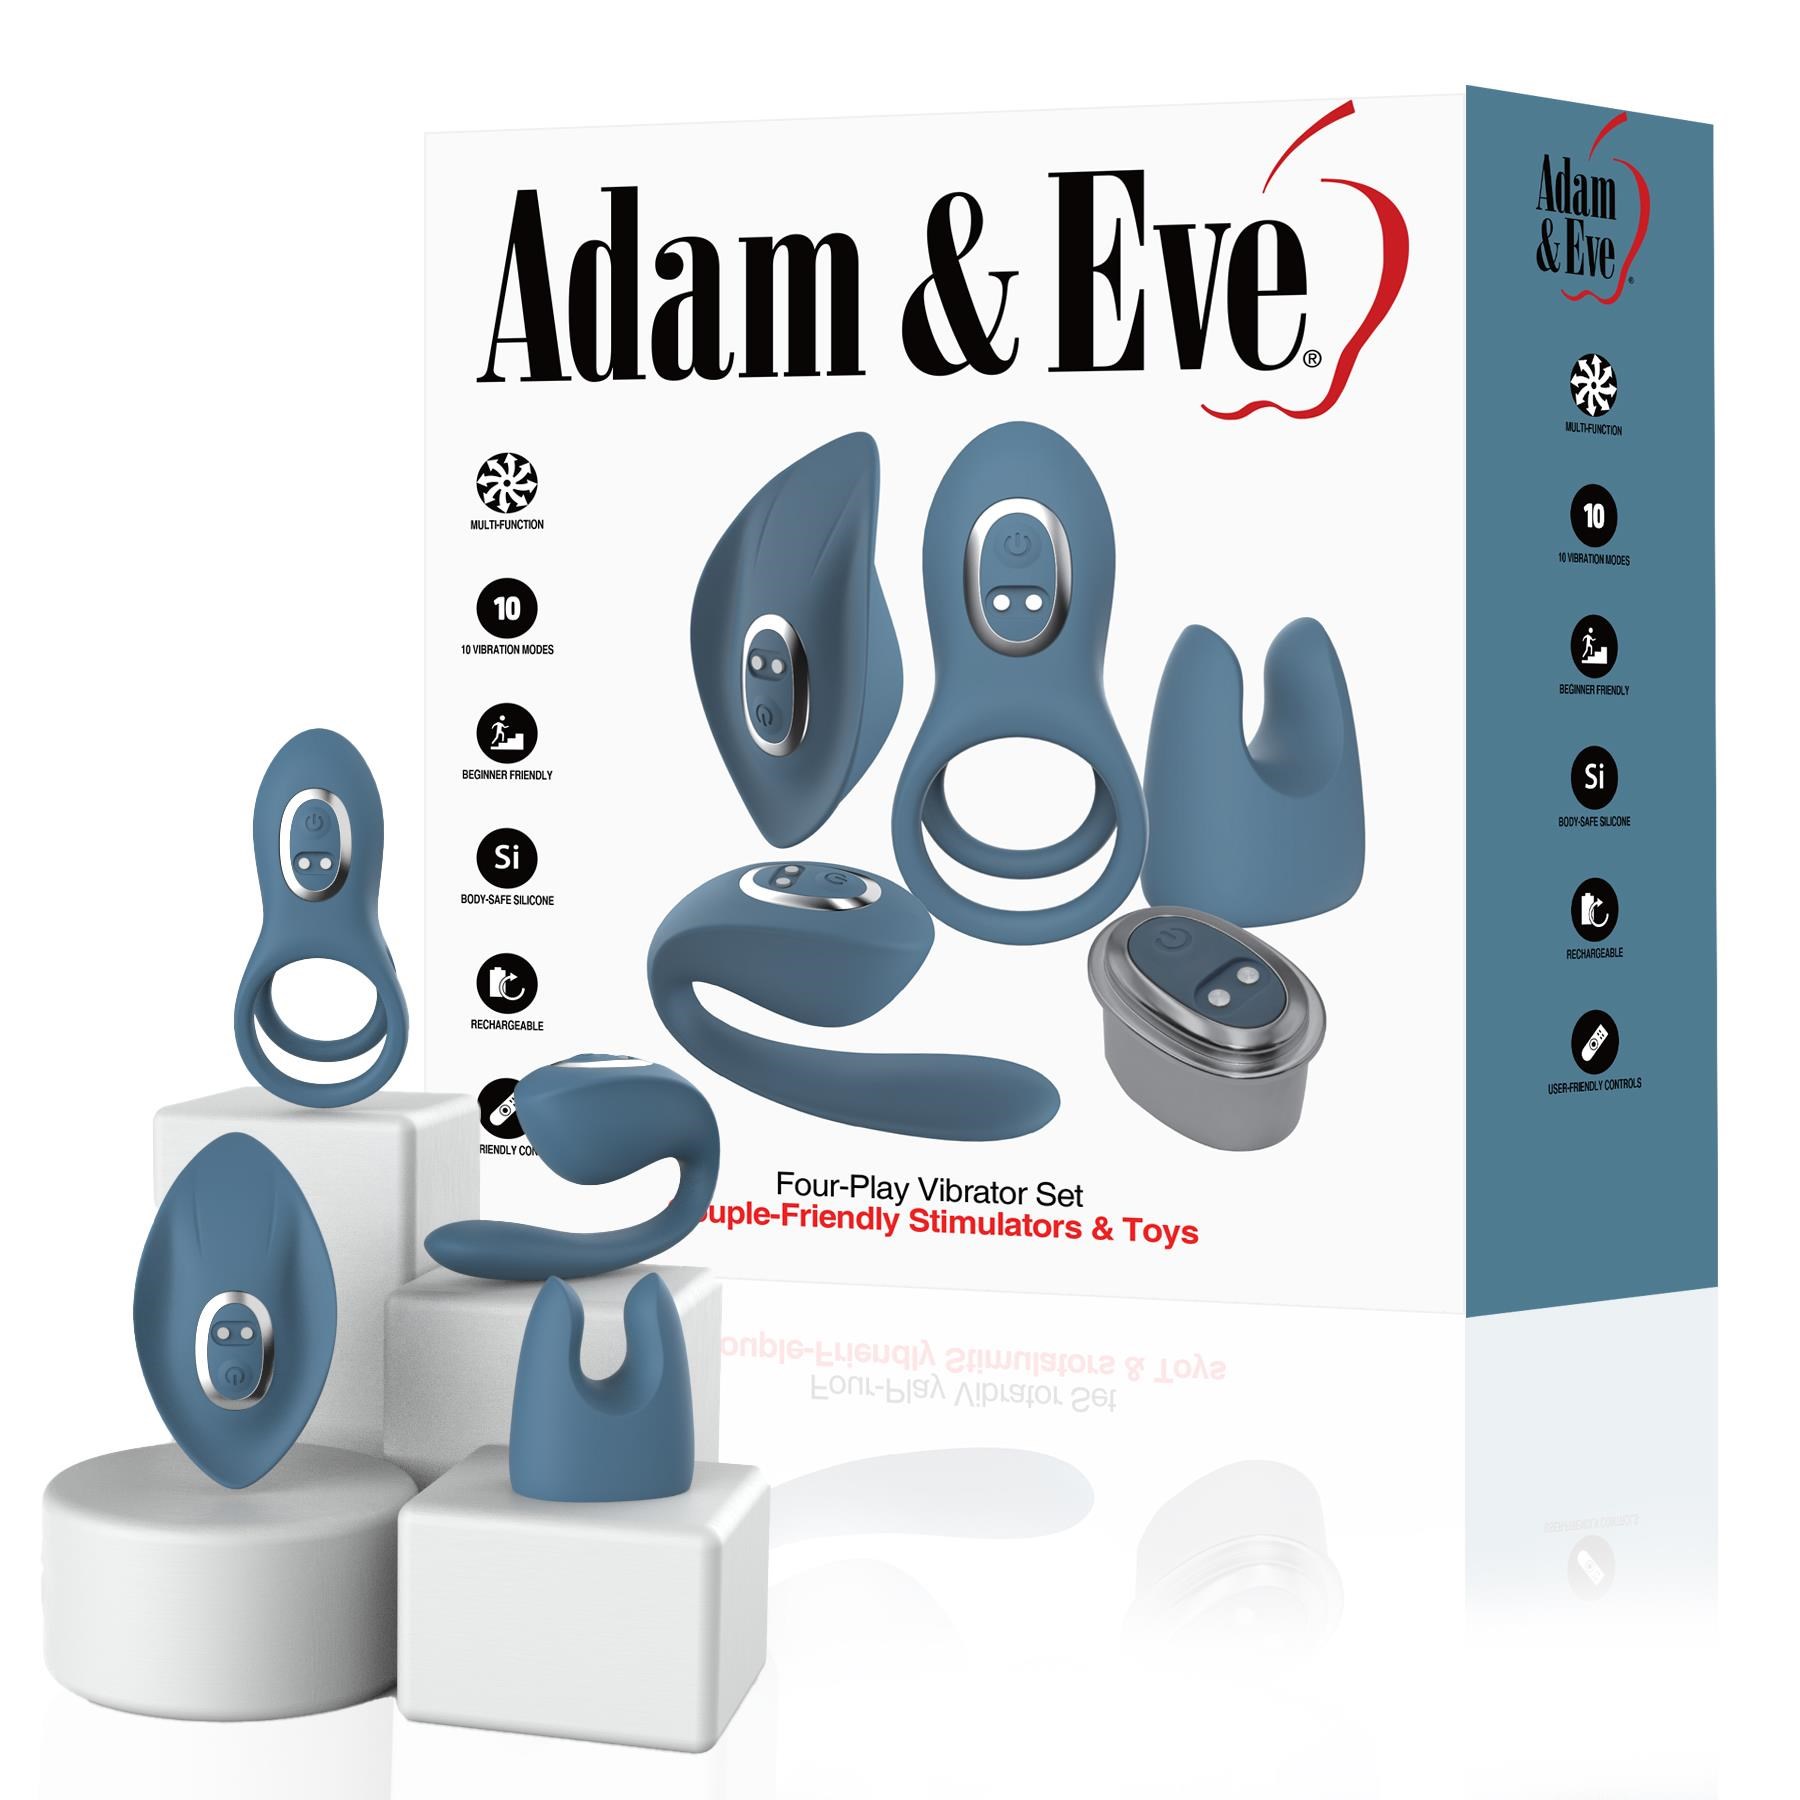 Adam & Eve Four-Play Vibrator Set - Package and Products